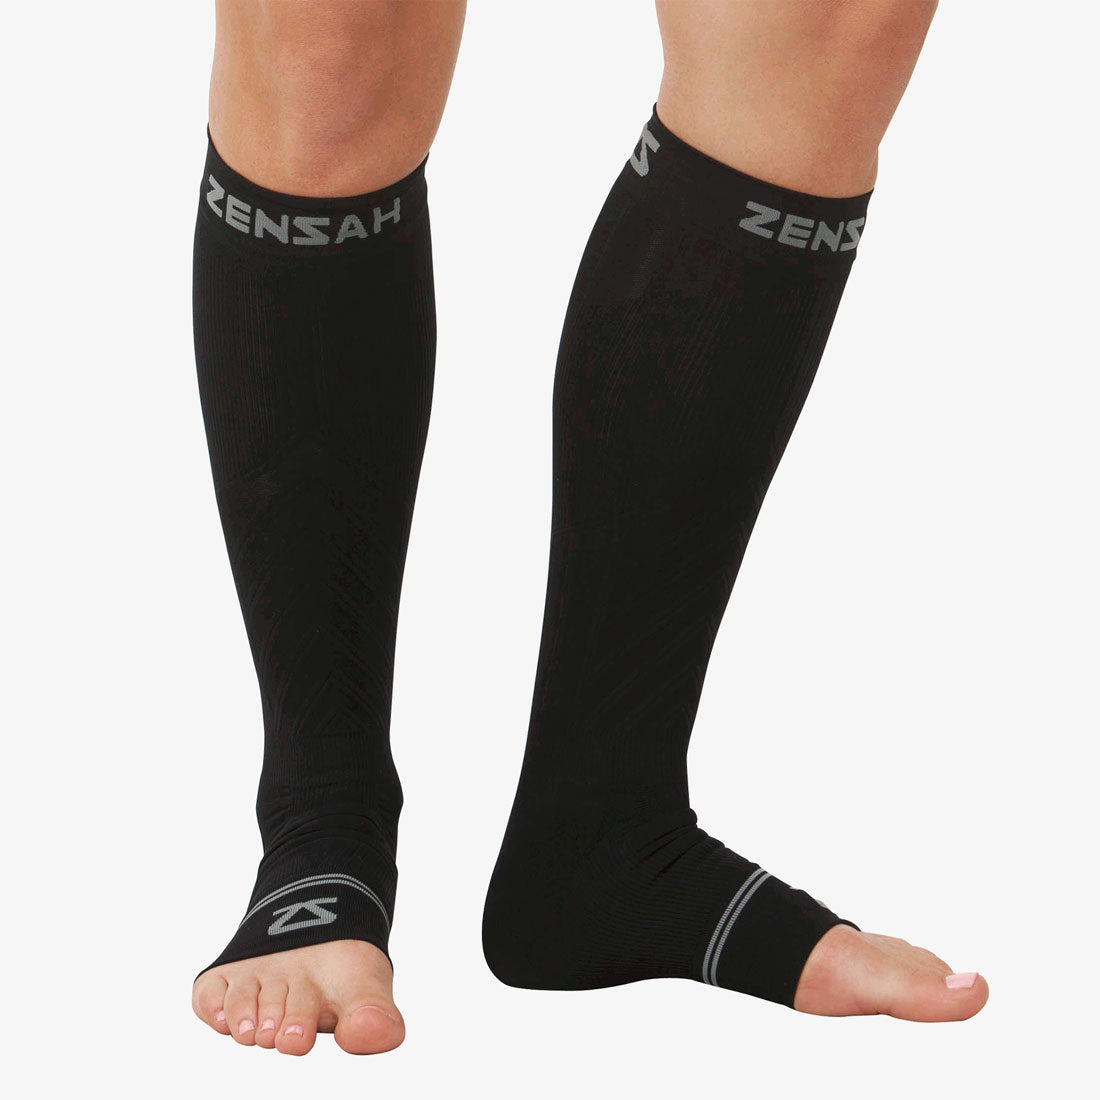 Zensah Ultra Compression Leg Sleeves for Running, Shin Splint Relief,  White,Small : Buy Online at Best Price in KSA - Souq is now :  Health